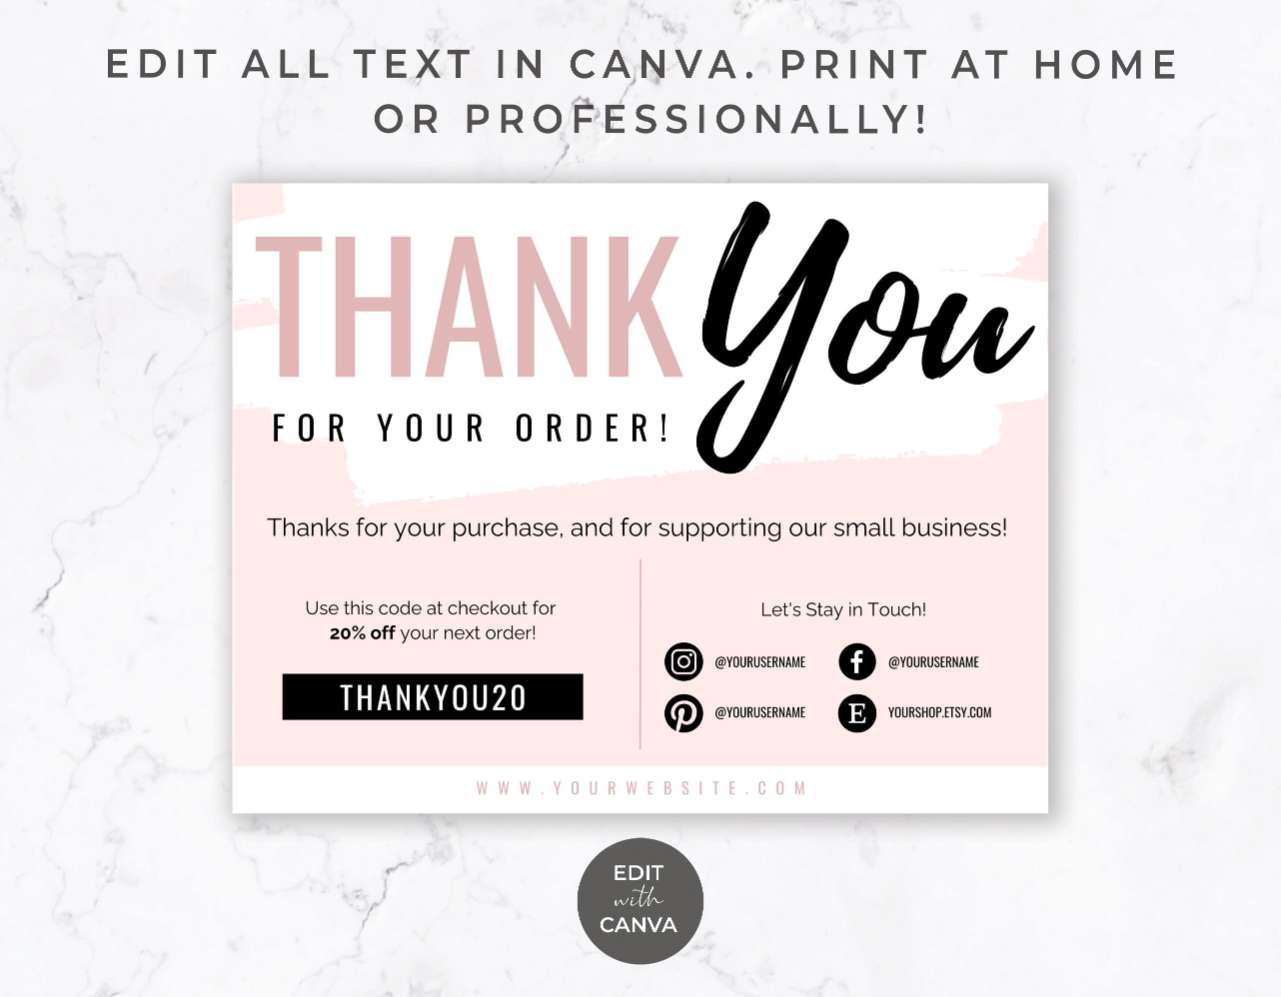 Thank You Order Card for Canva – Blush & Black